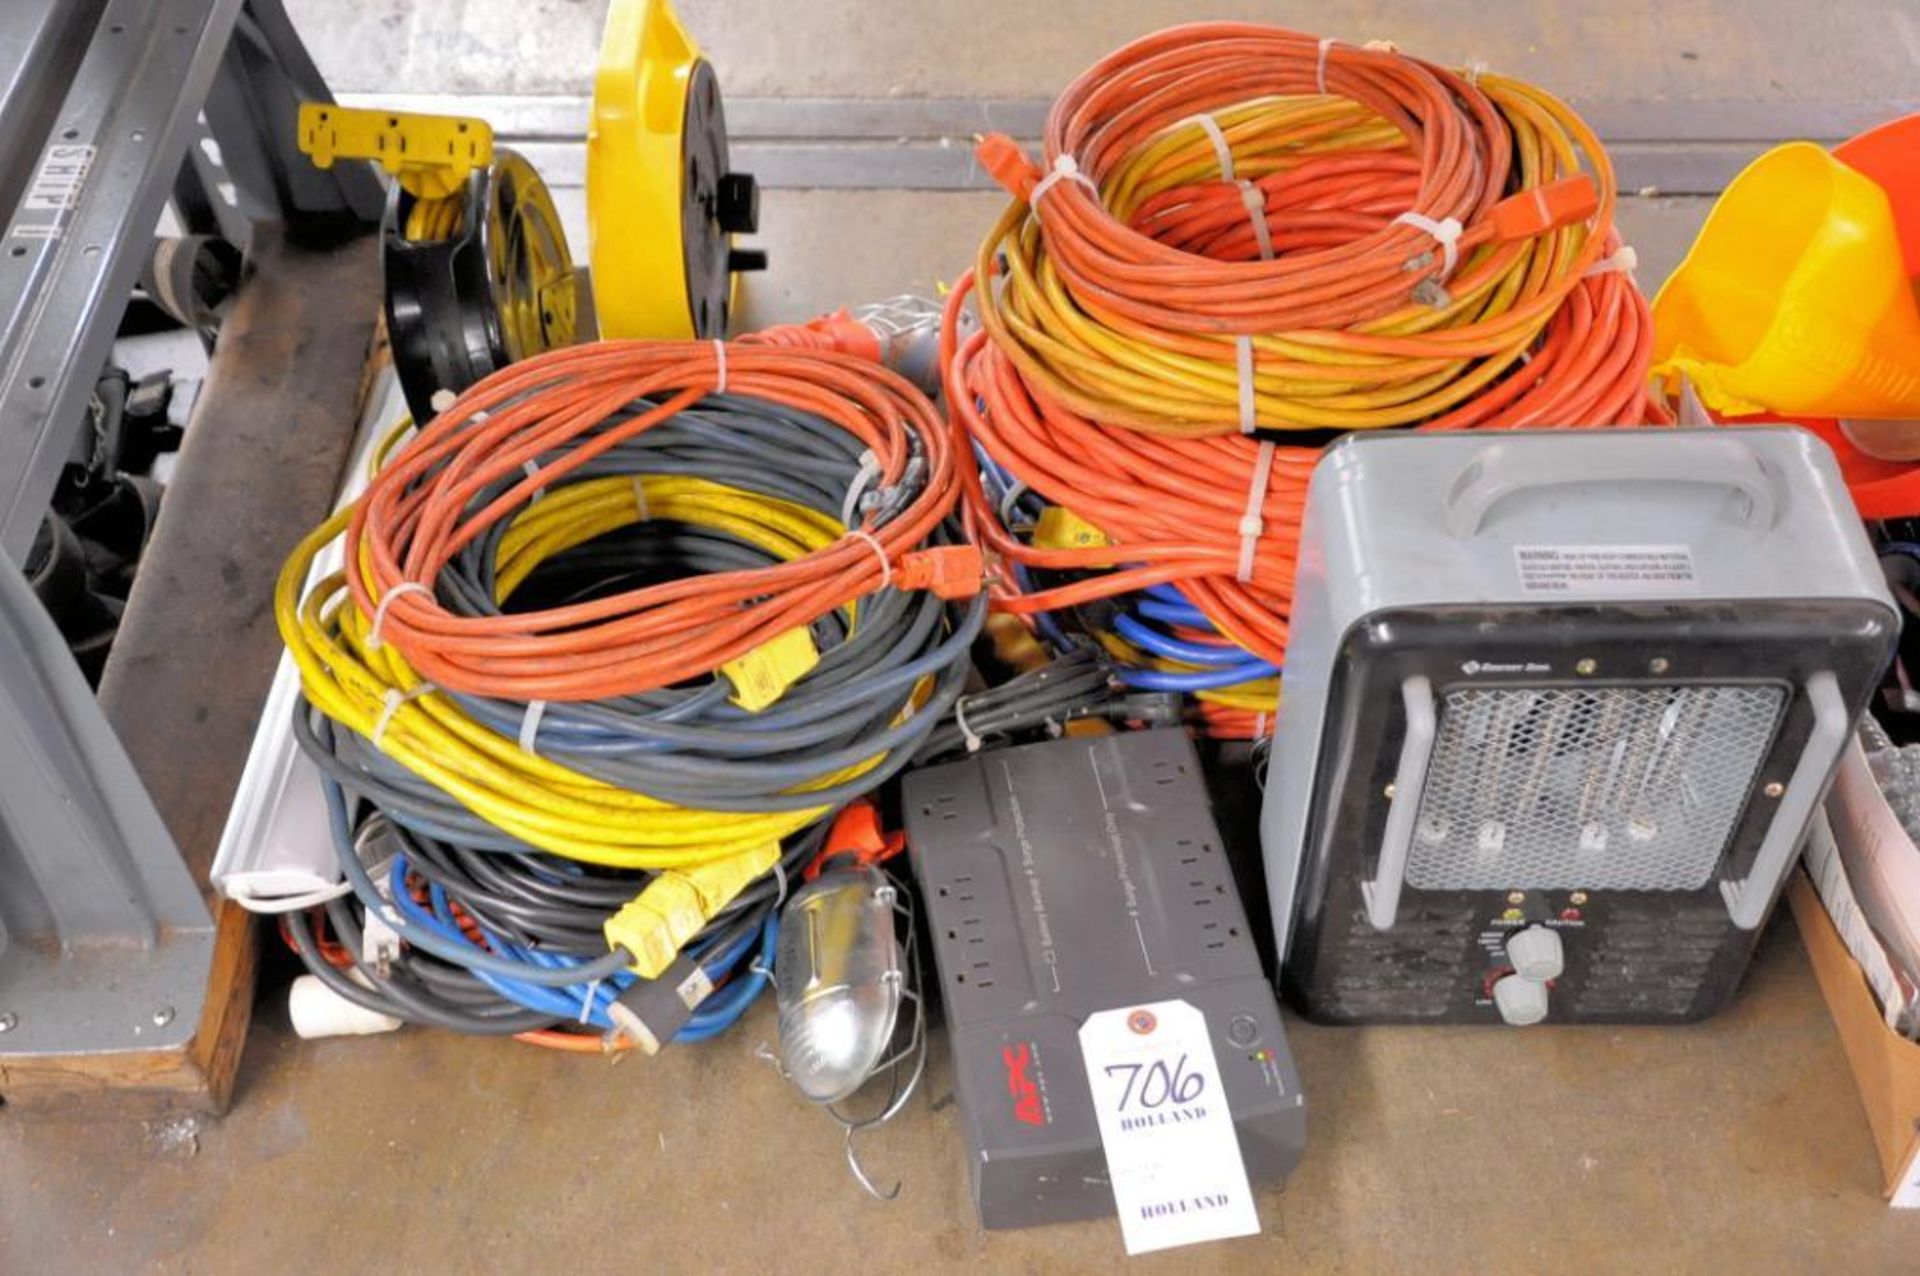 Lot - Extension Cords, Cord Reels, Space Heater and APC Battery Backup Surge Protector